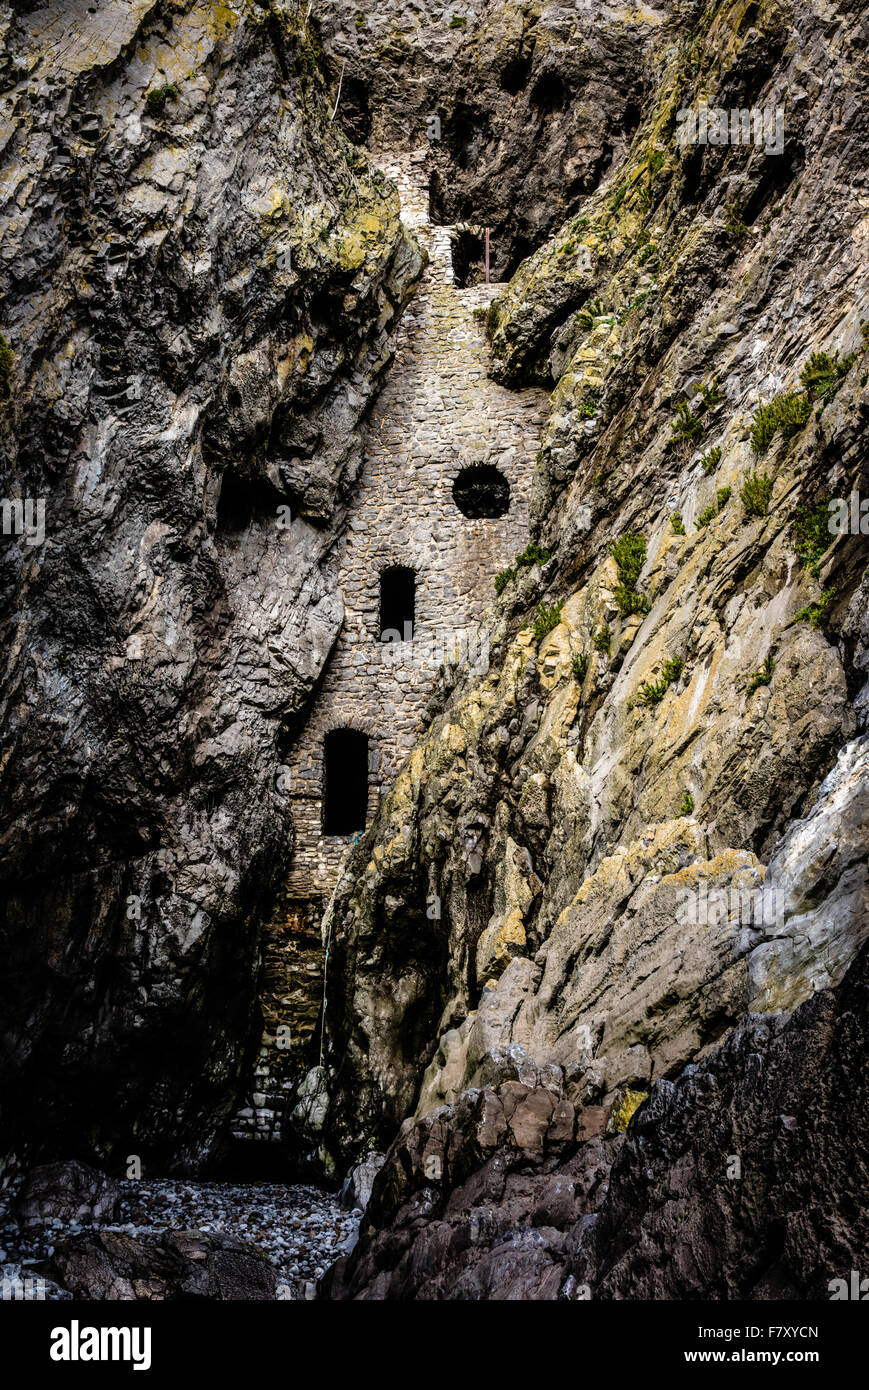 Culver Hole a historic dovecote built into cliffs near Port Eynon on the Gower peninsula in South Wales UK Stock Photo